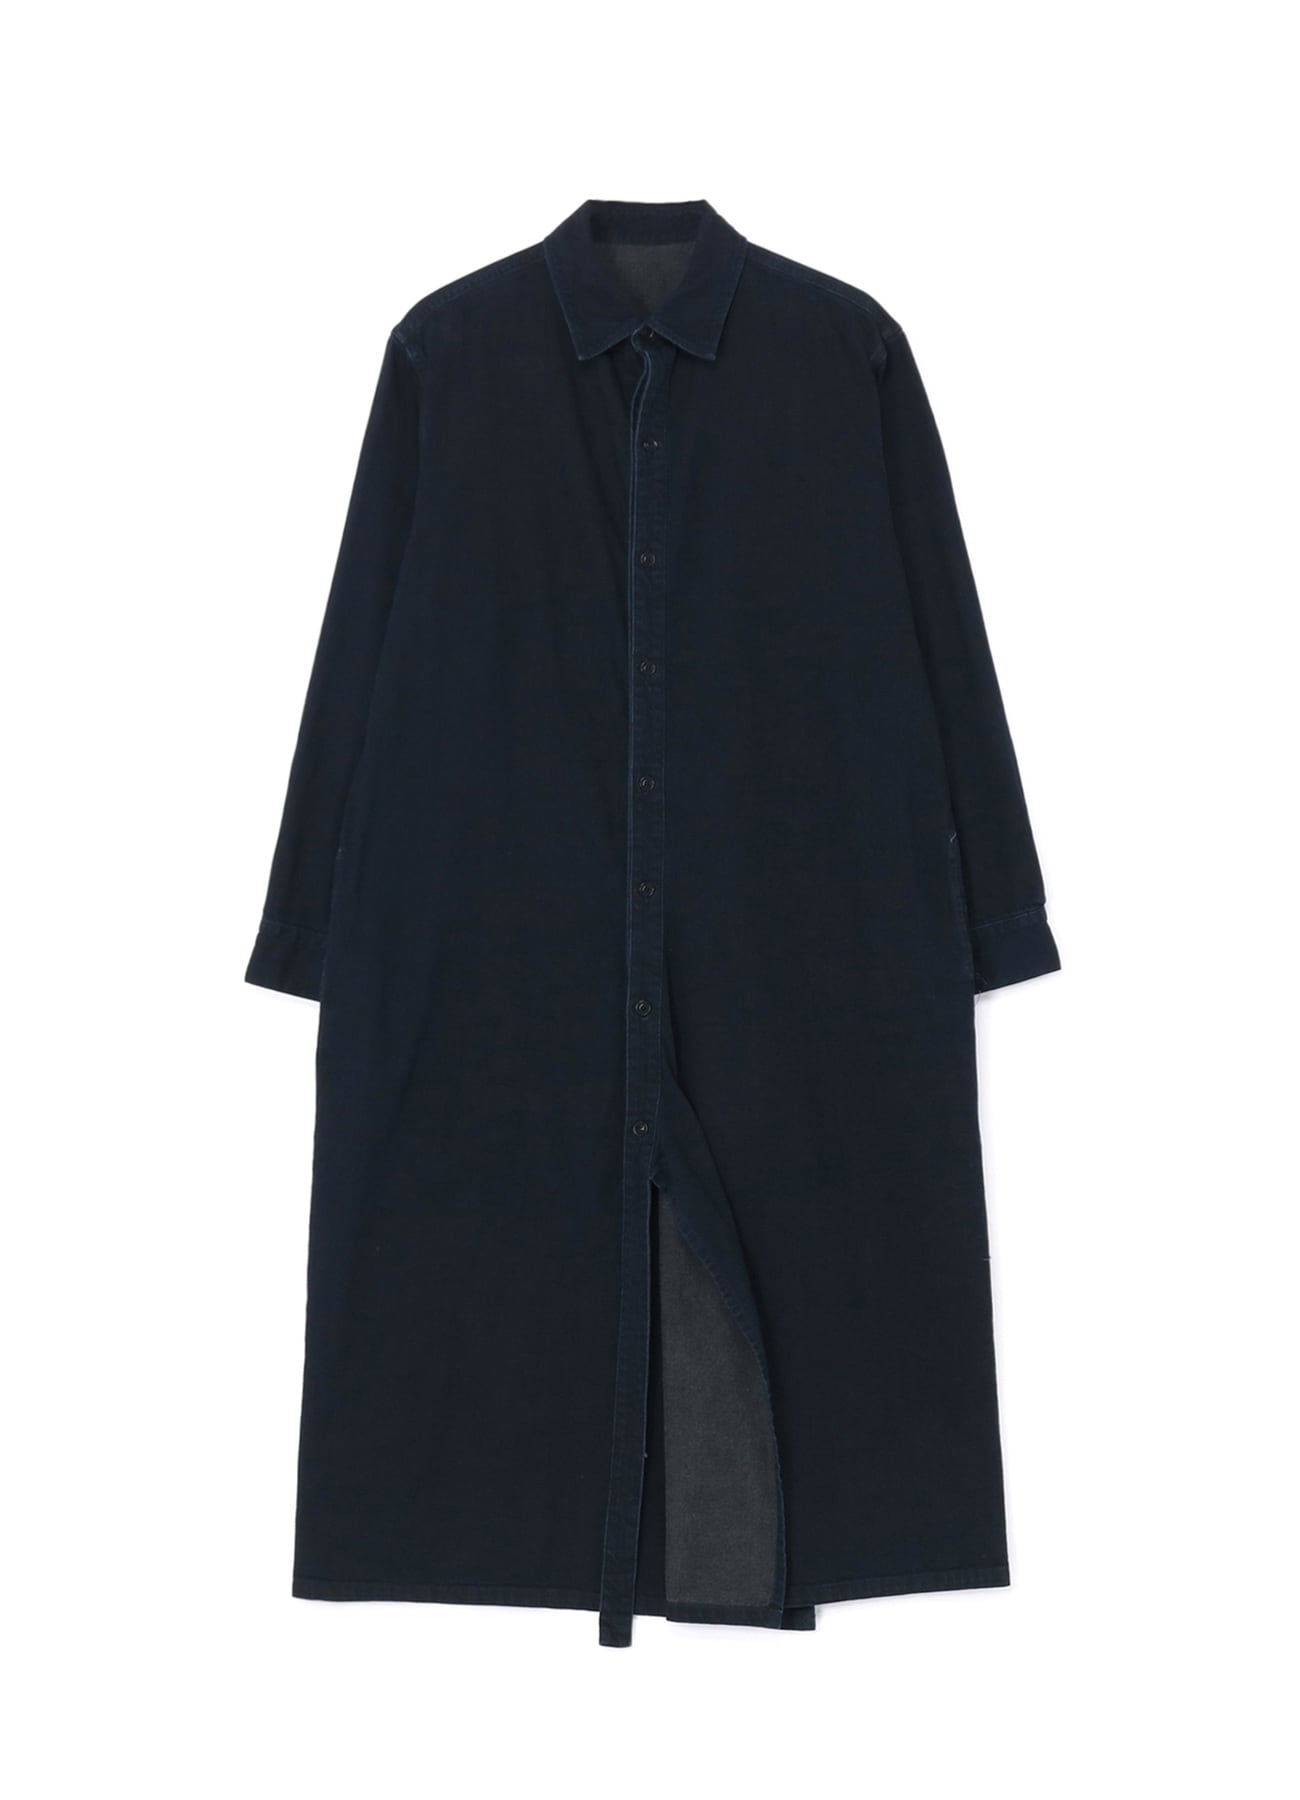 Y's｜ [Official] THE SHOP YOHJI YAMAMOTO (2/12 page)